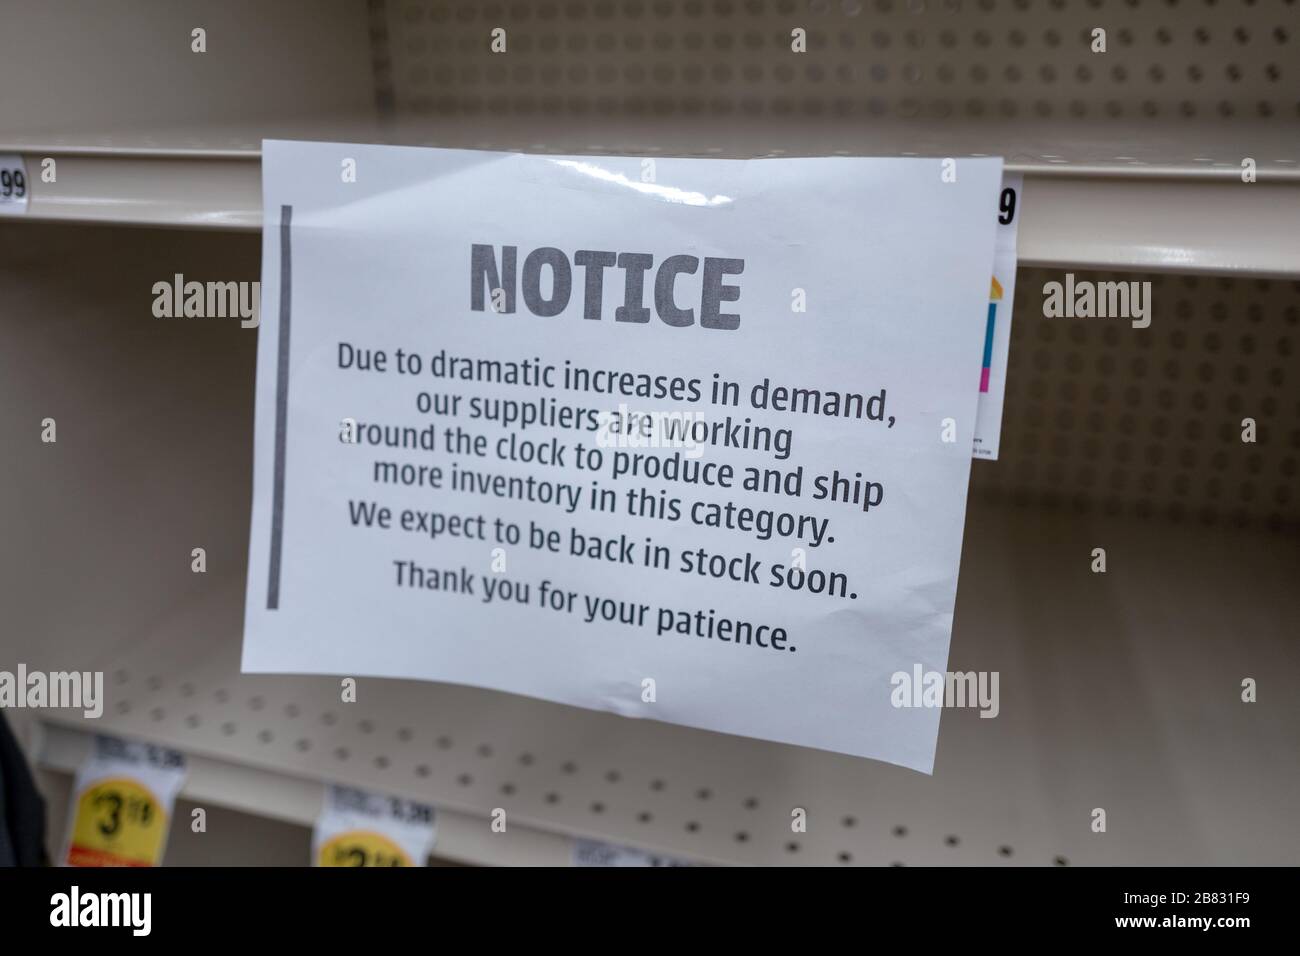 A sign at a Lucky supermarket states that supply issues have led to shortages of several products during an outbreak of the COVID-19 coronavirus in Contra Costa County, Danville, California, March 18, 2020. () Stock Photo